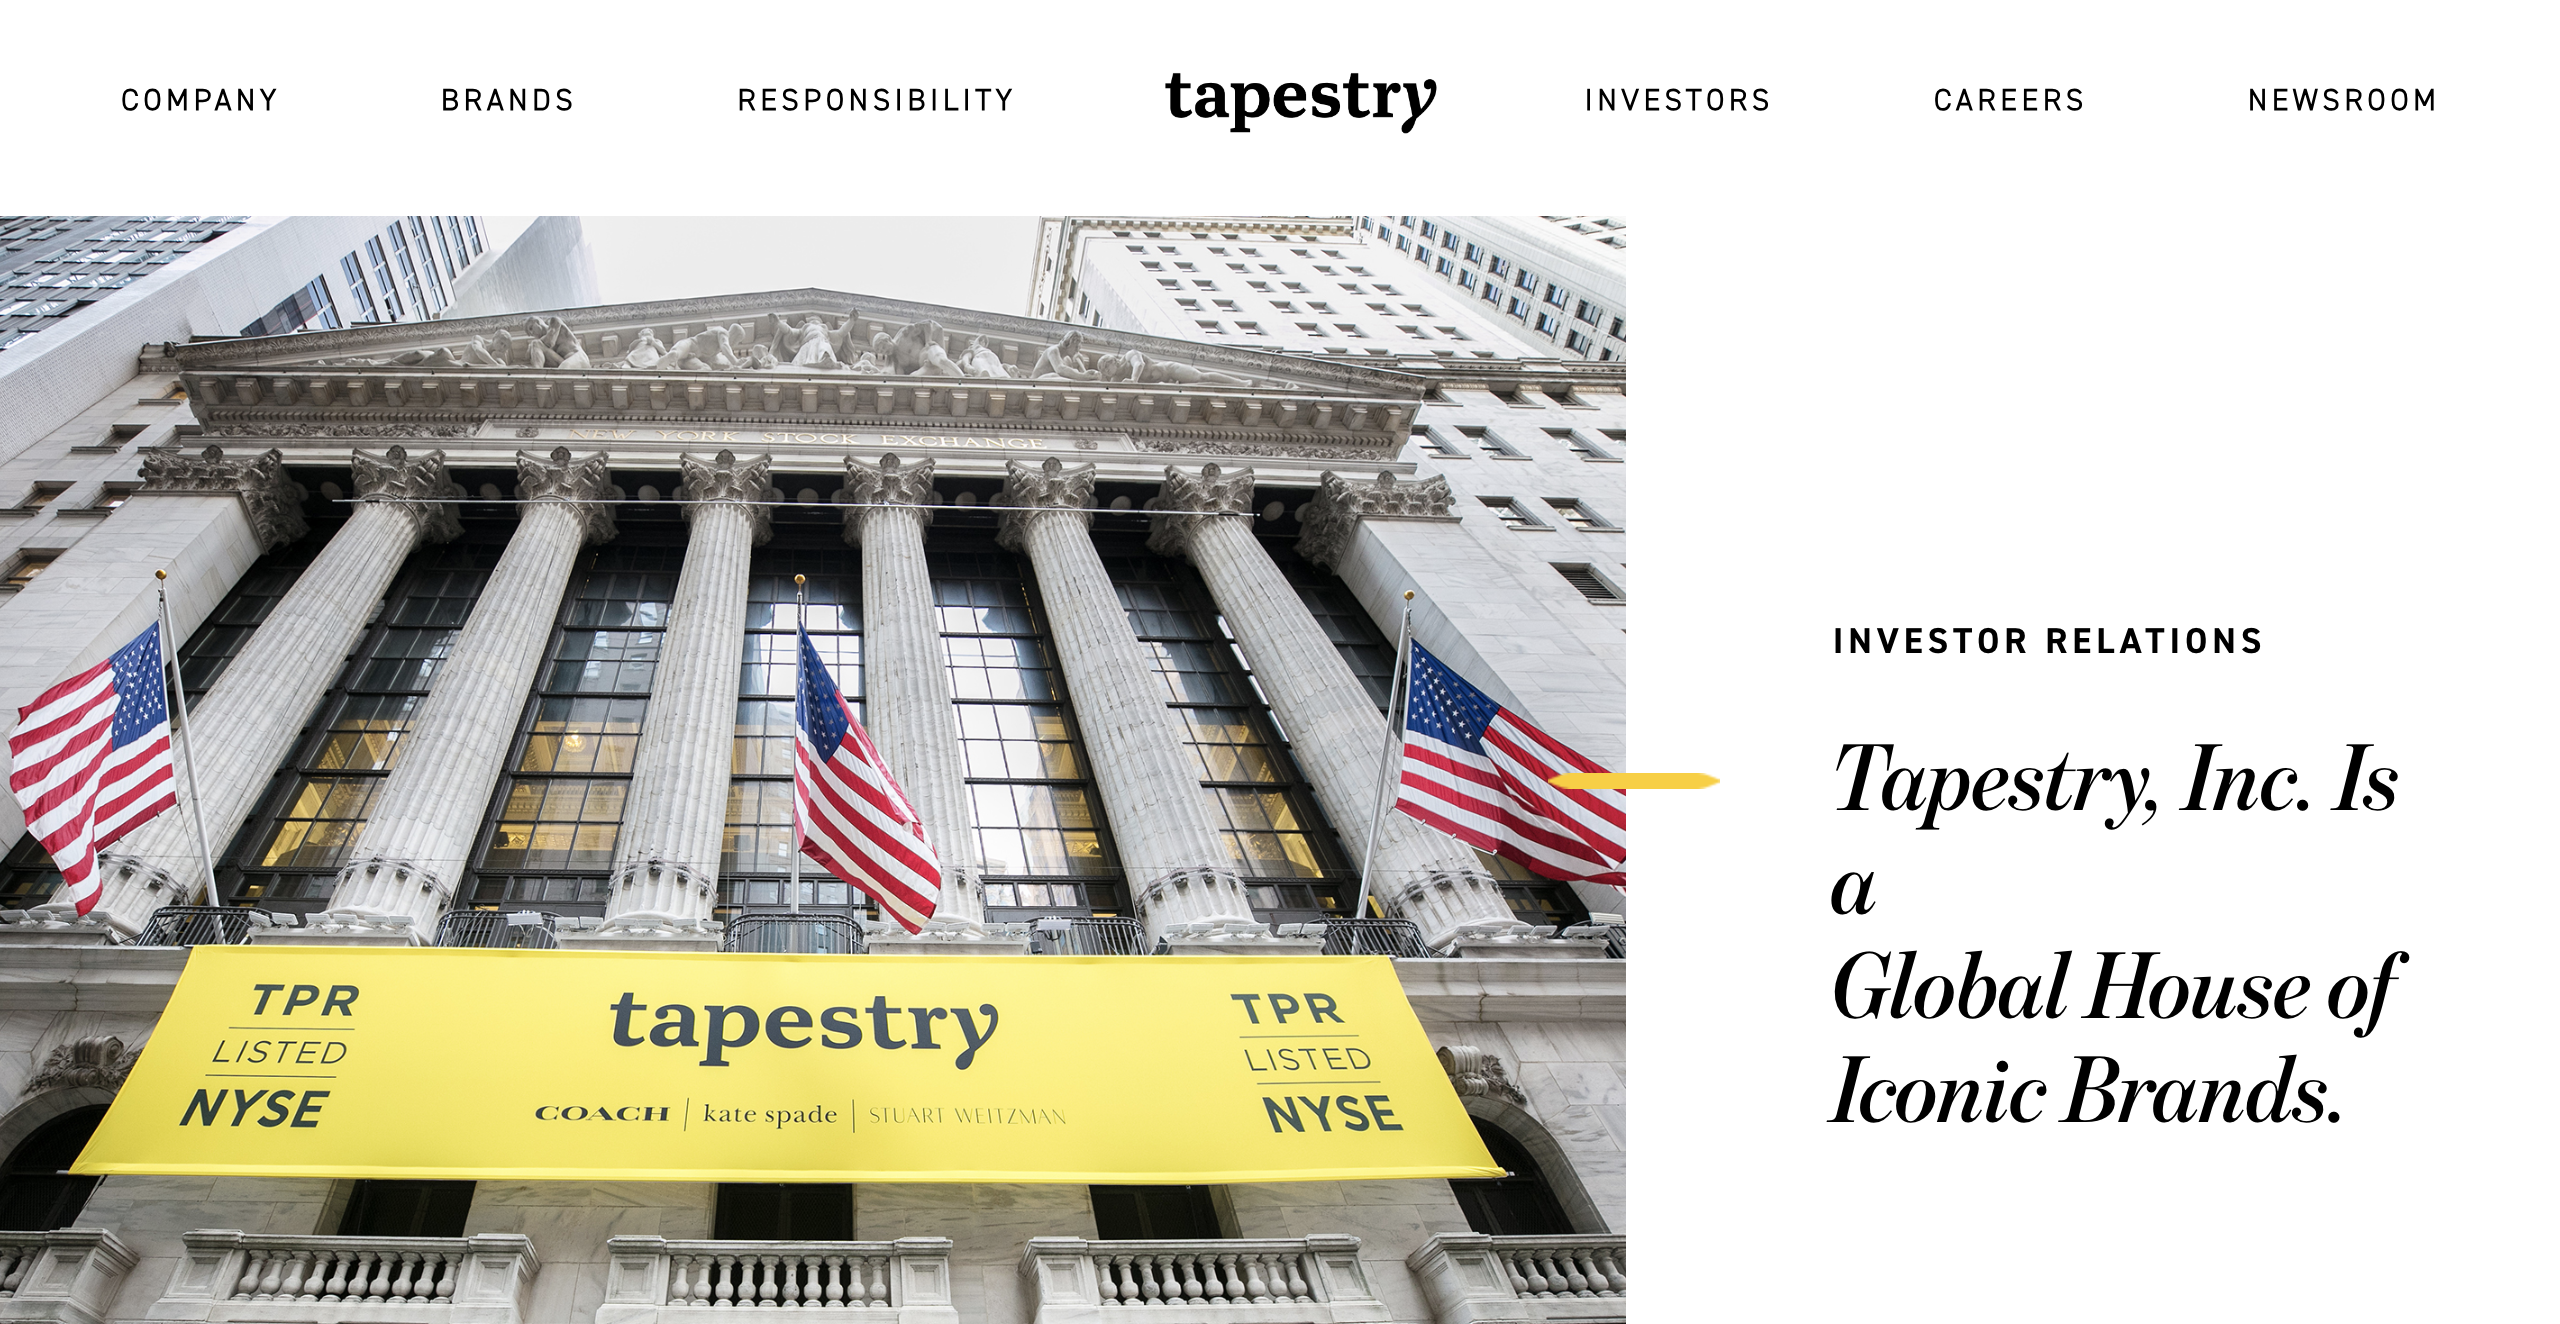 Tapestry’s Quarterly Report: 2% Decline in China, Aims to Complete Capri Acquisition This Year